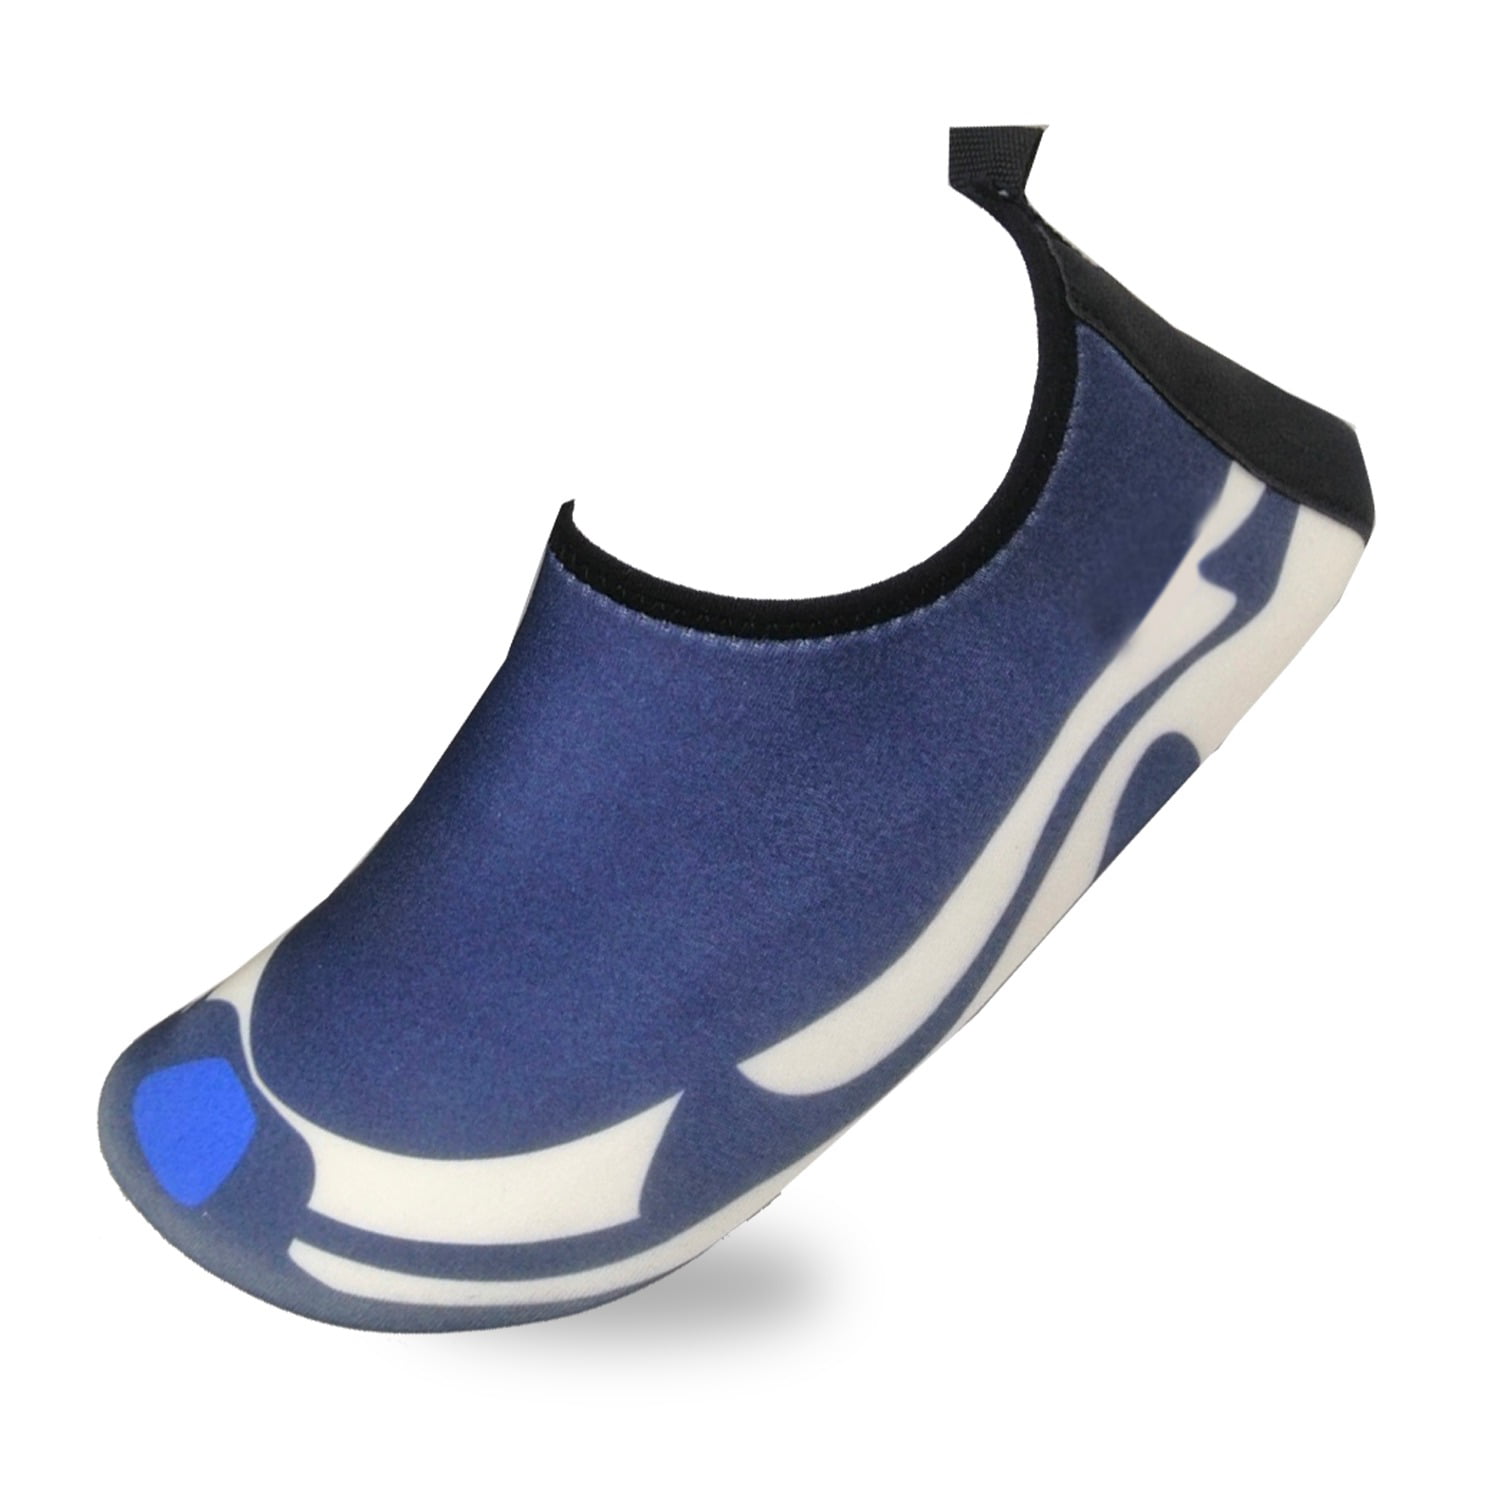 Details about   Equick Water Shoes,Quick-Dry Aqua Socks 